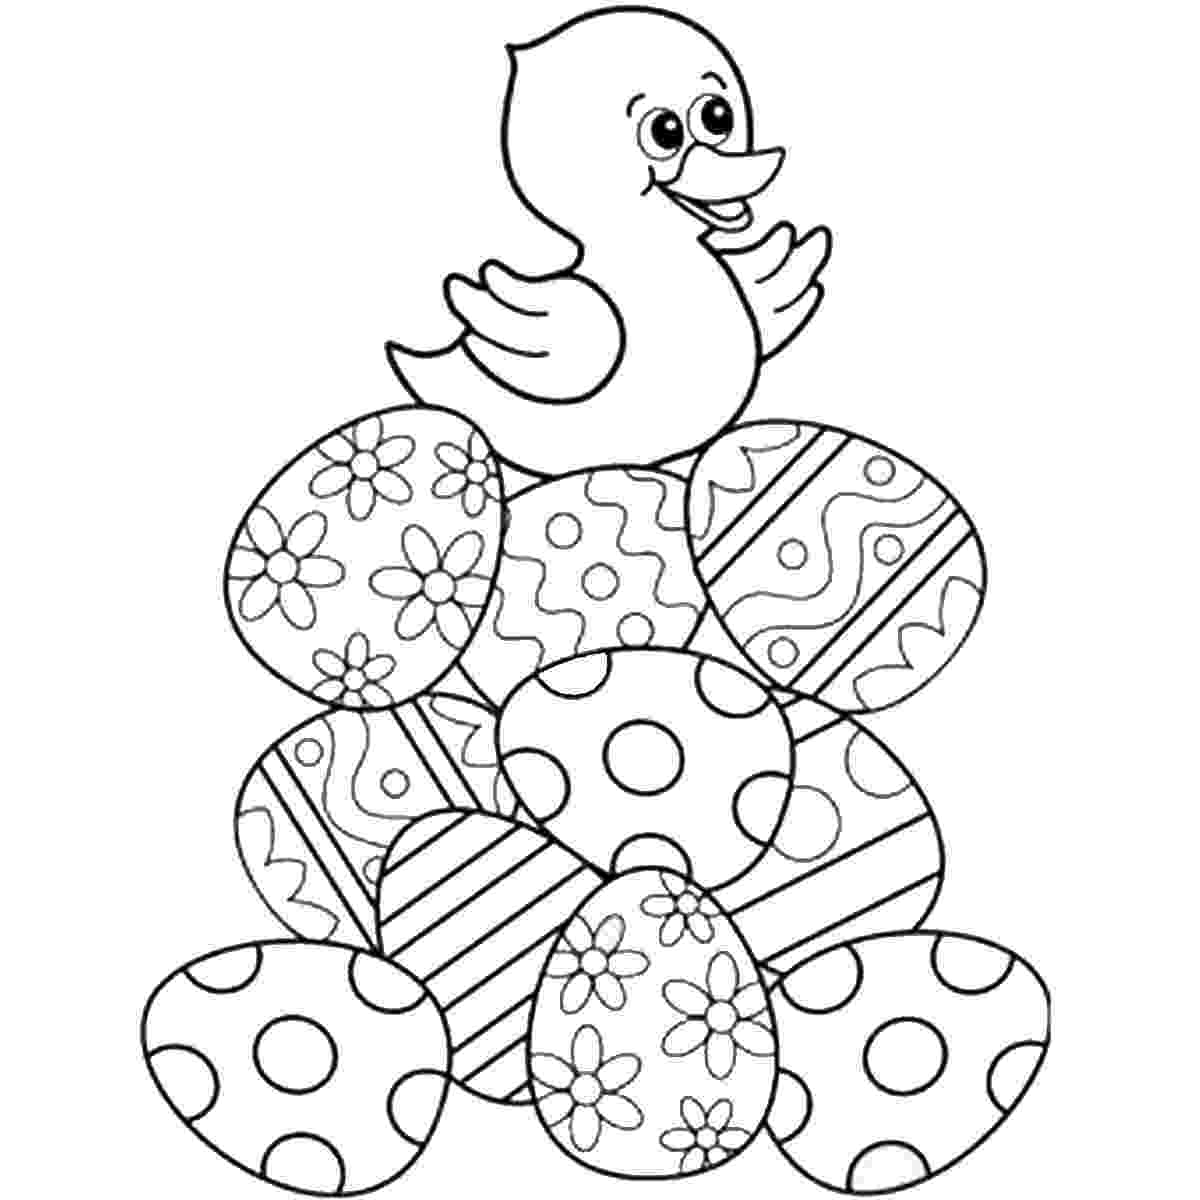 printable colouring sheets for easter easter coloring pages february 2012 for easter colouring printable sheets 